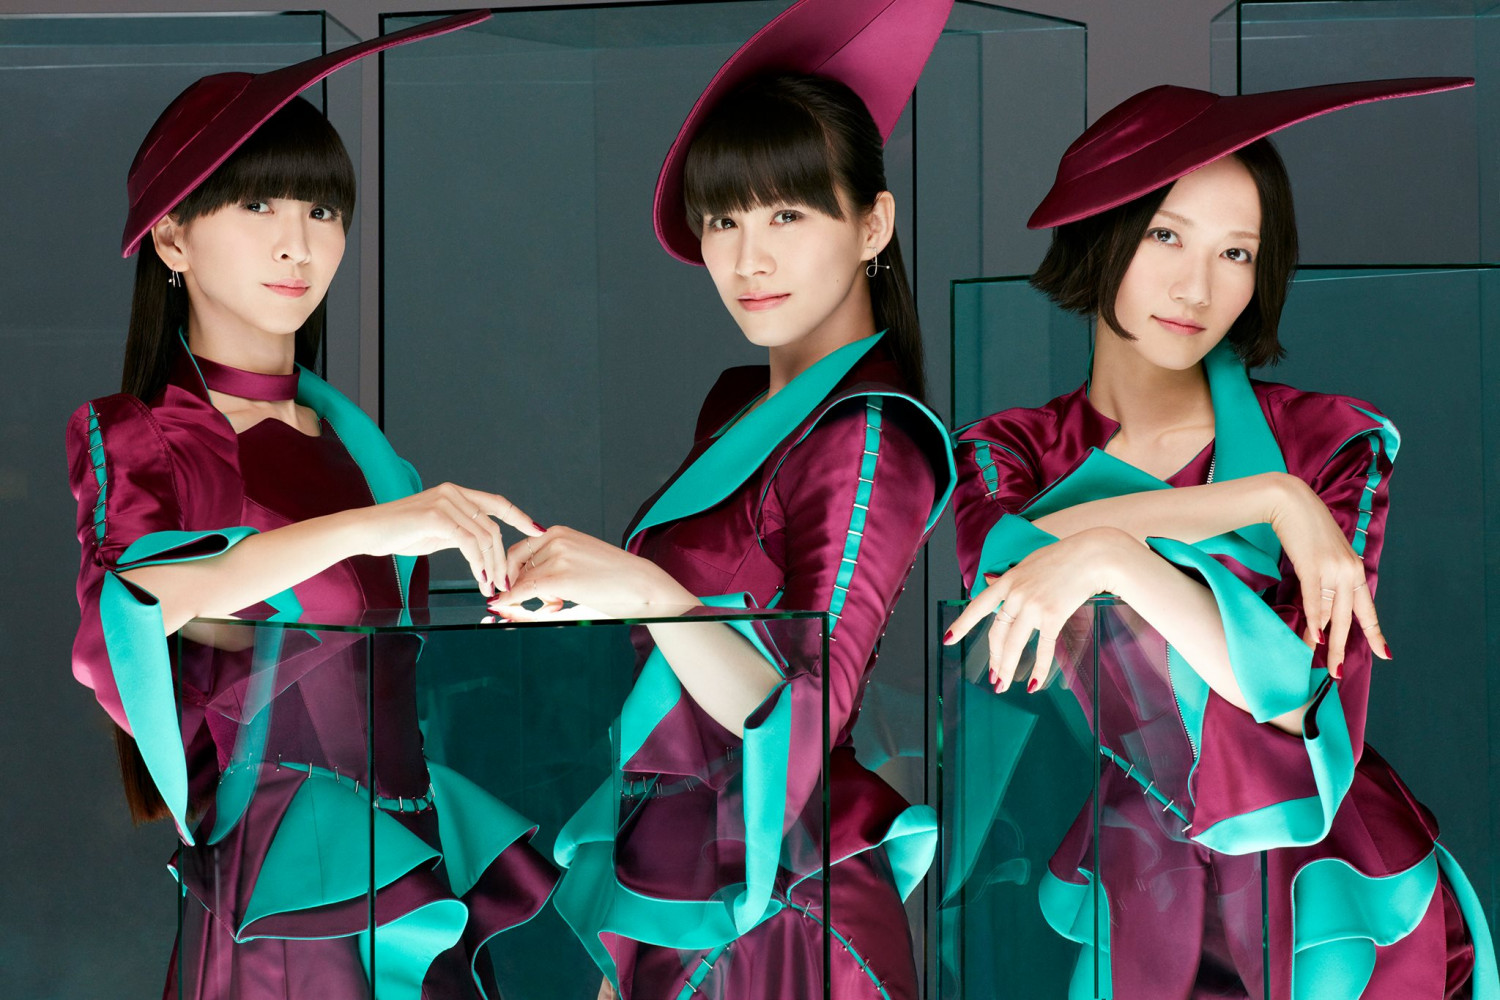 Perfume Assemble the Masses From High Above the City in the MV for “TOKYO GIRL”